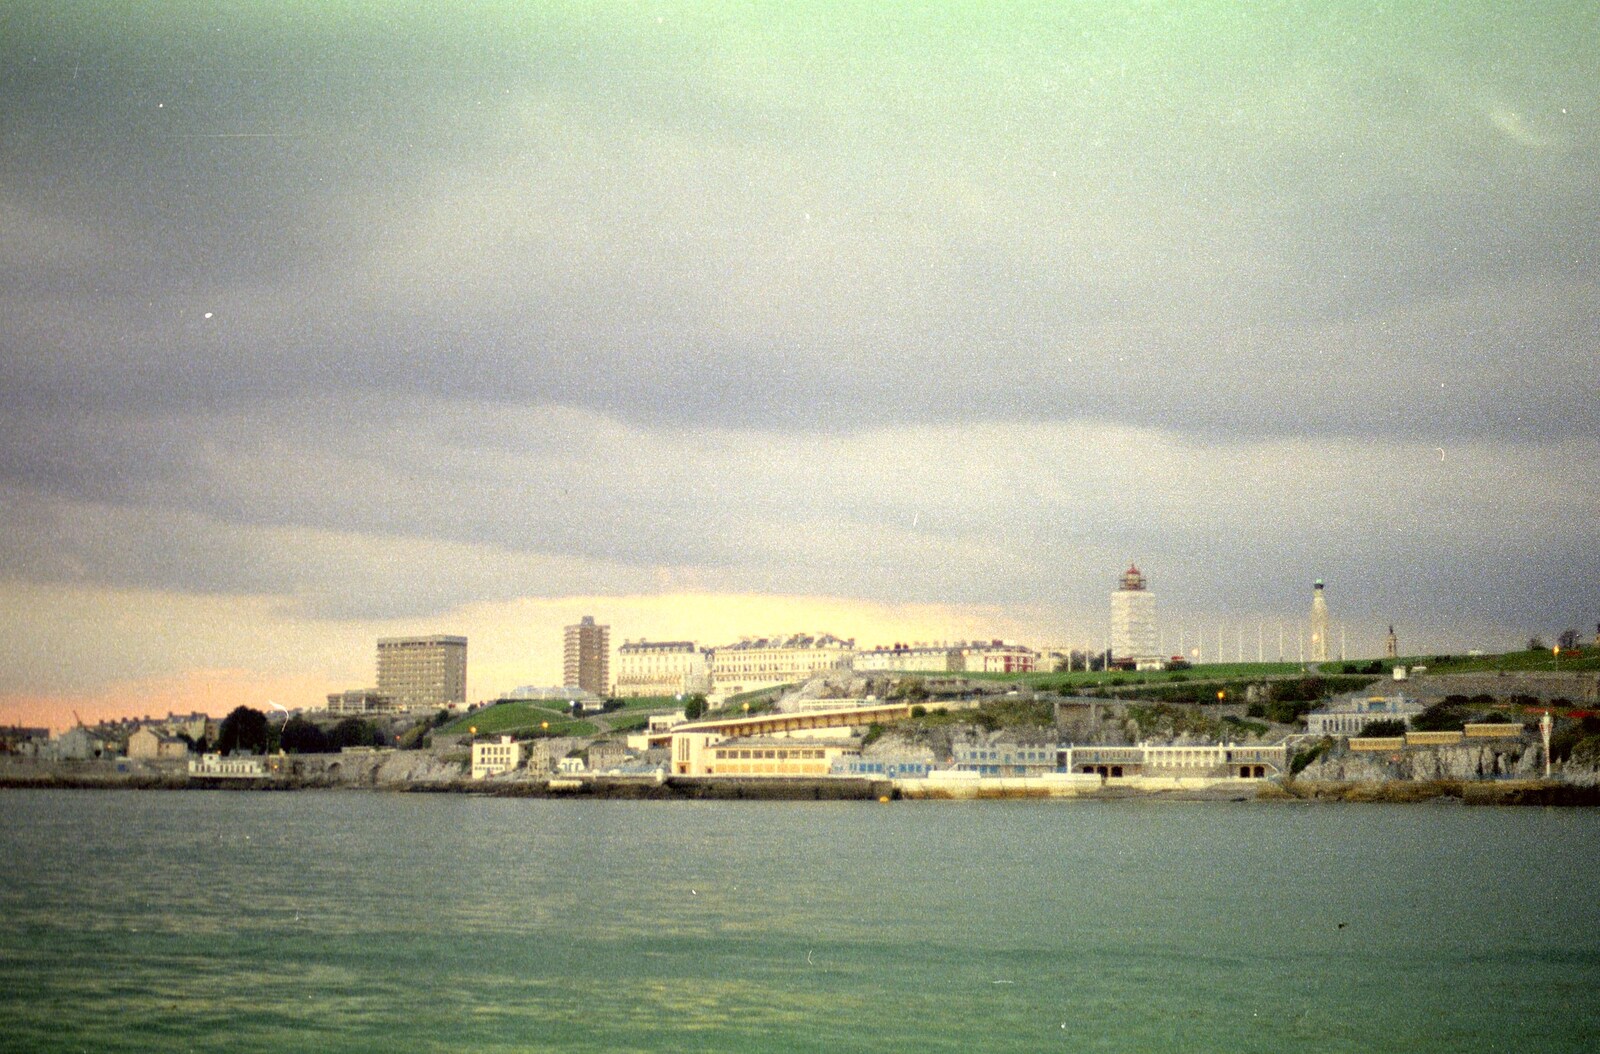 A view of Plymouth Hoe from the Sound from A Trip to Trotsky's Mount, Dartmoor, Devon - 20th March 1987